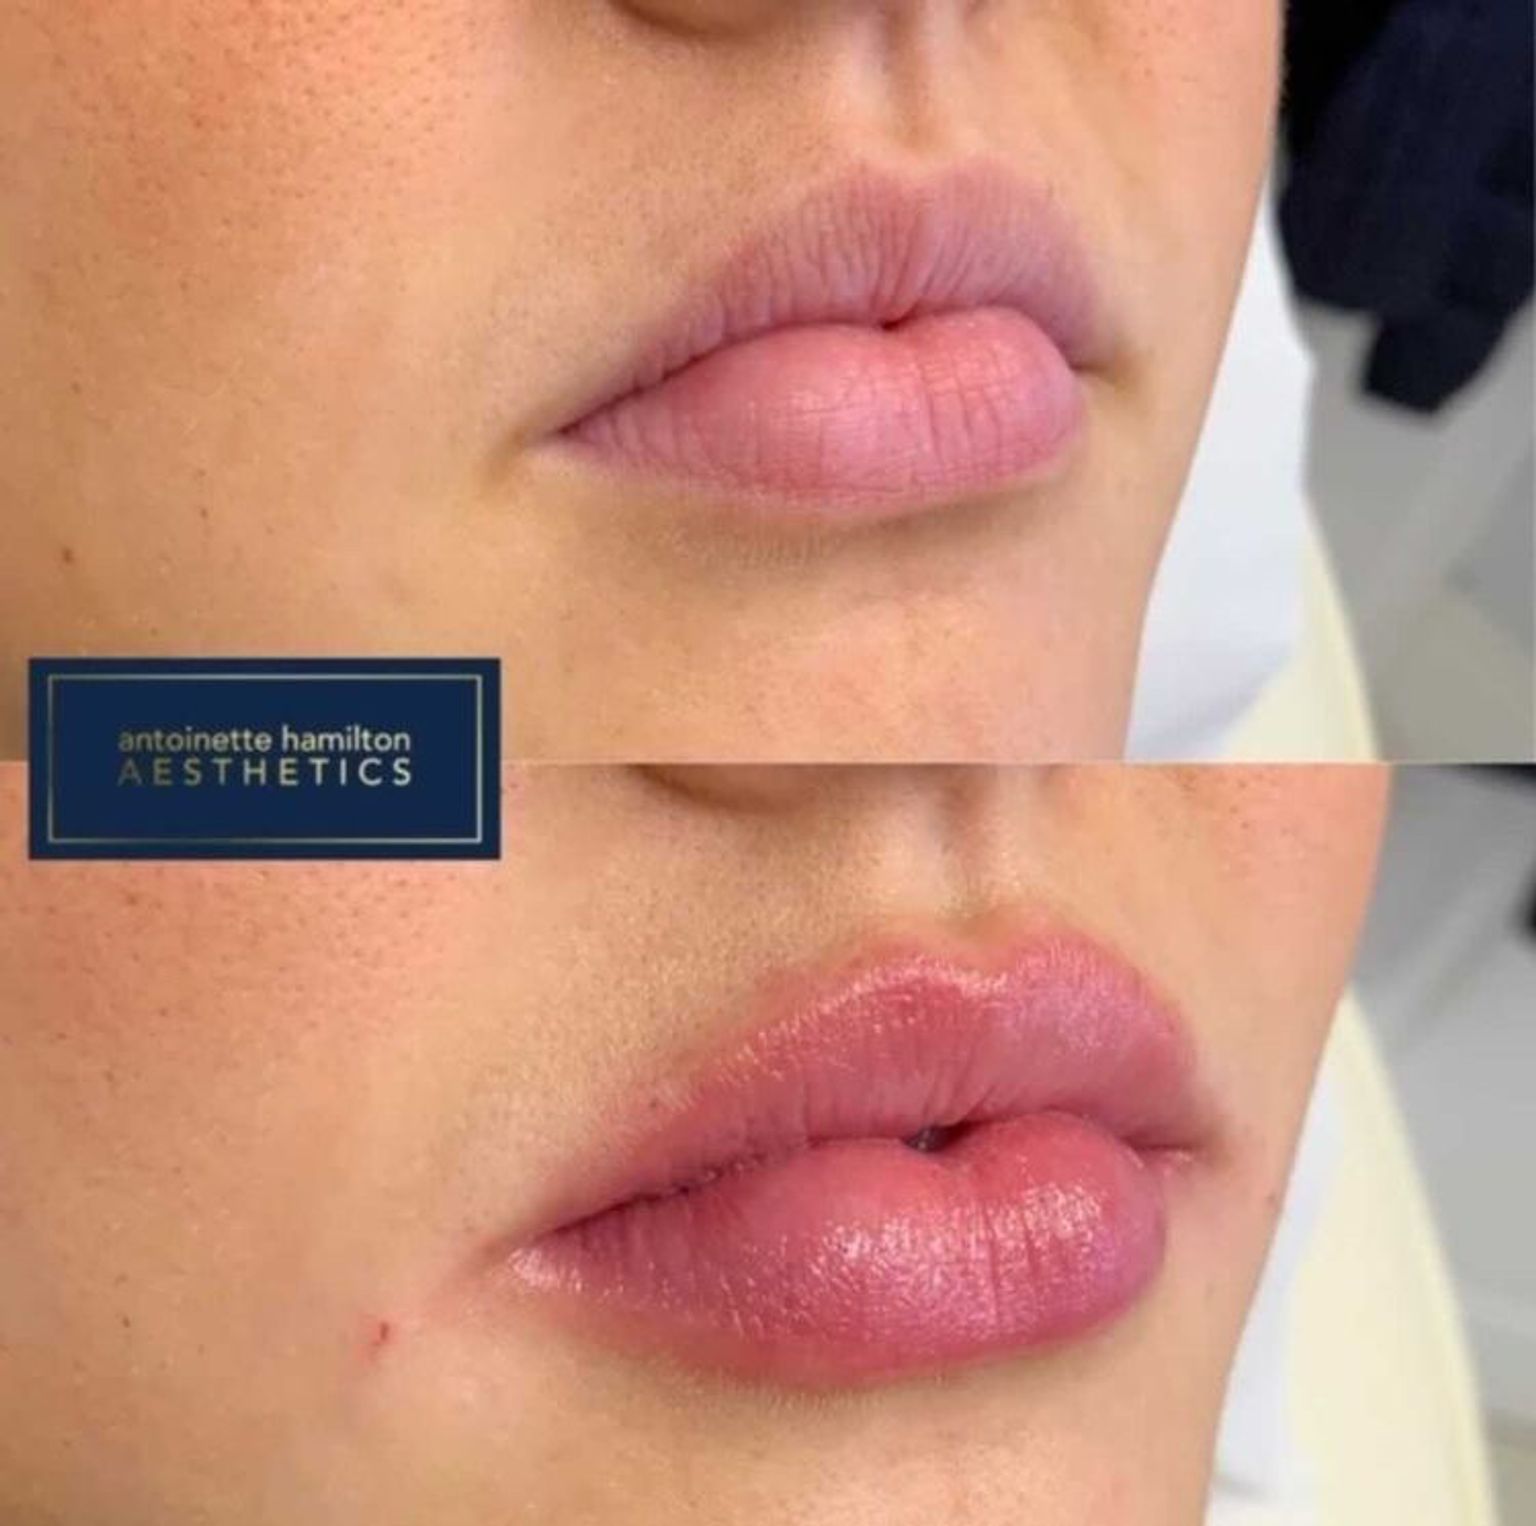 Lip fillers before and after